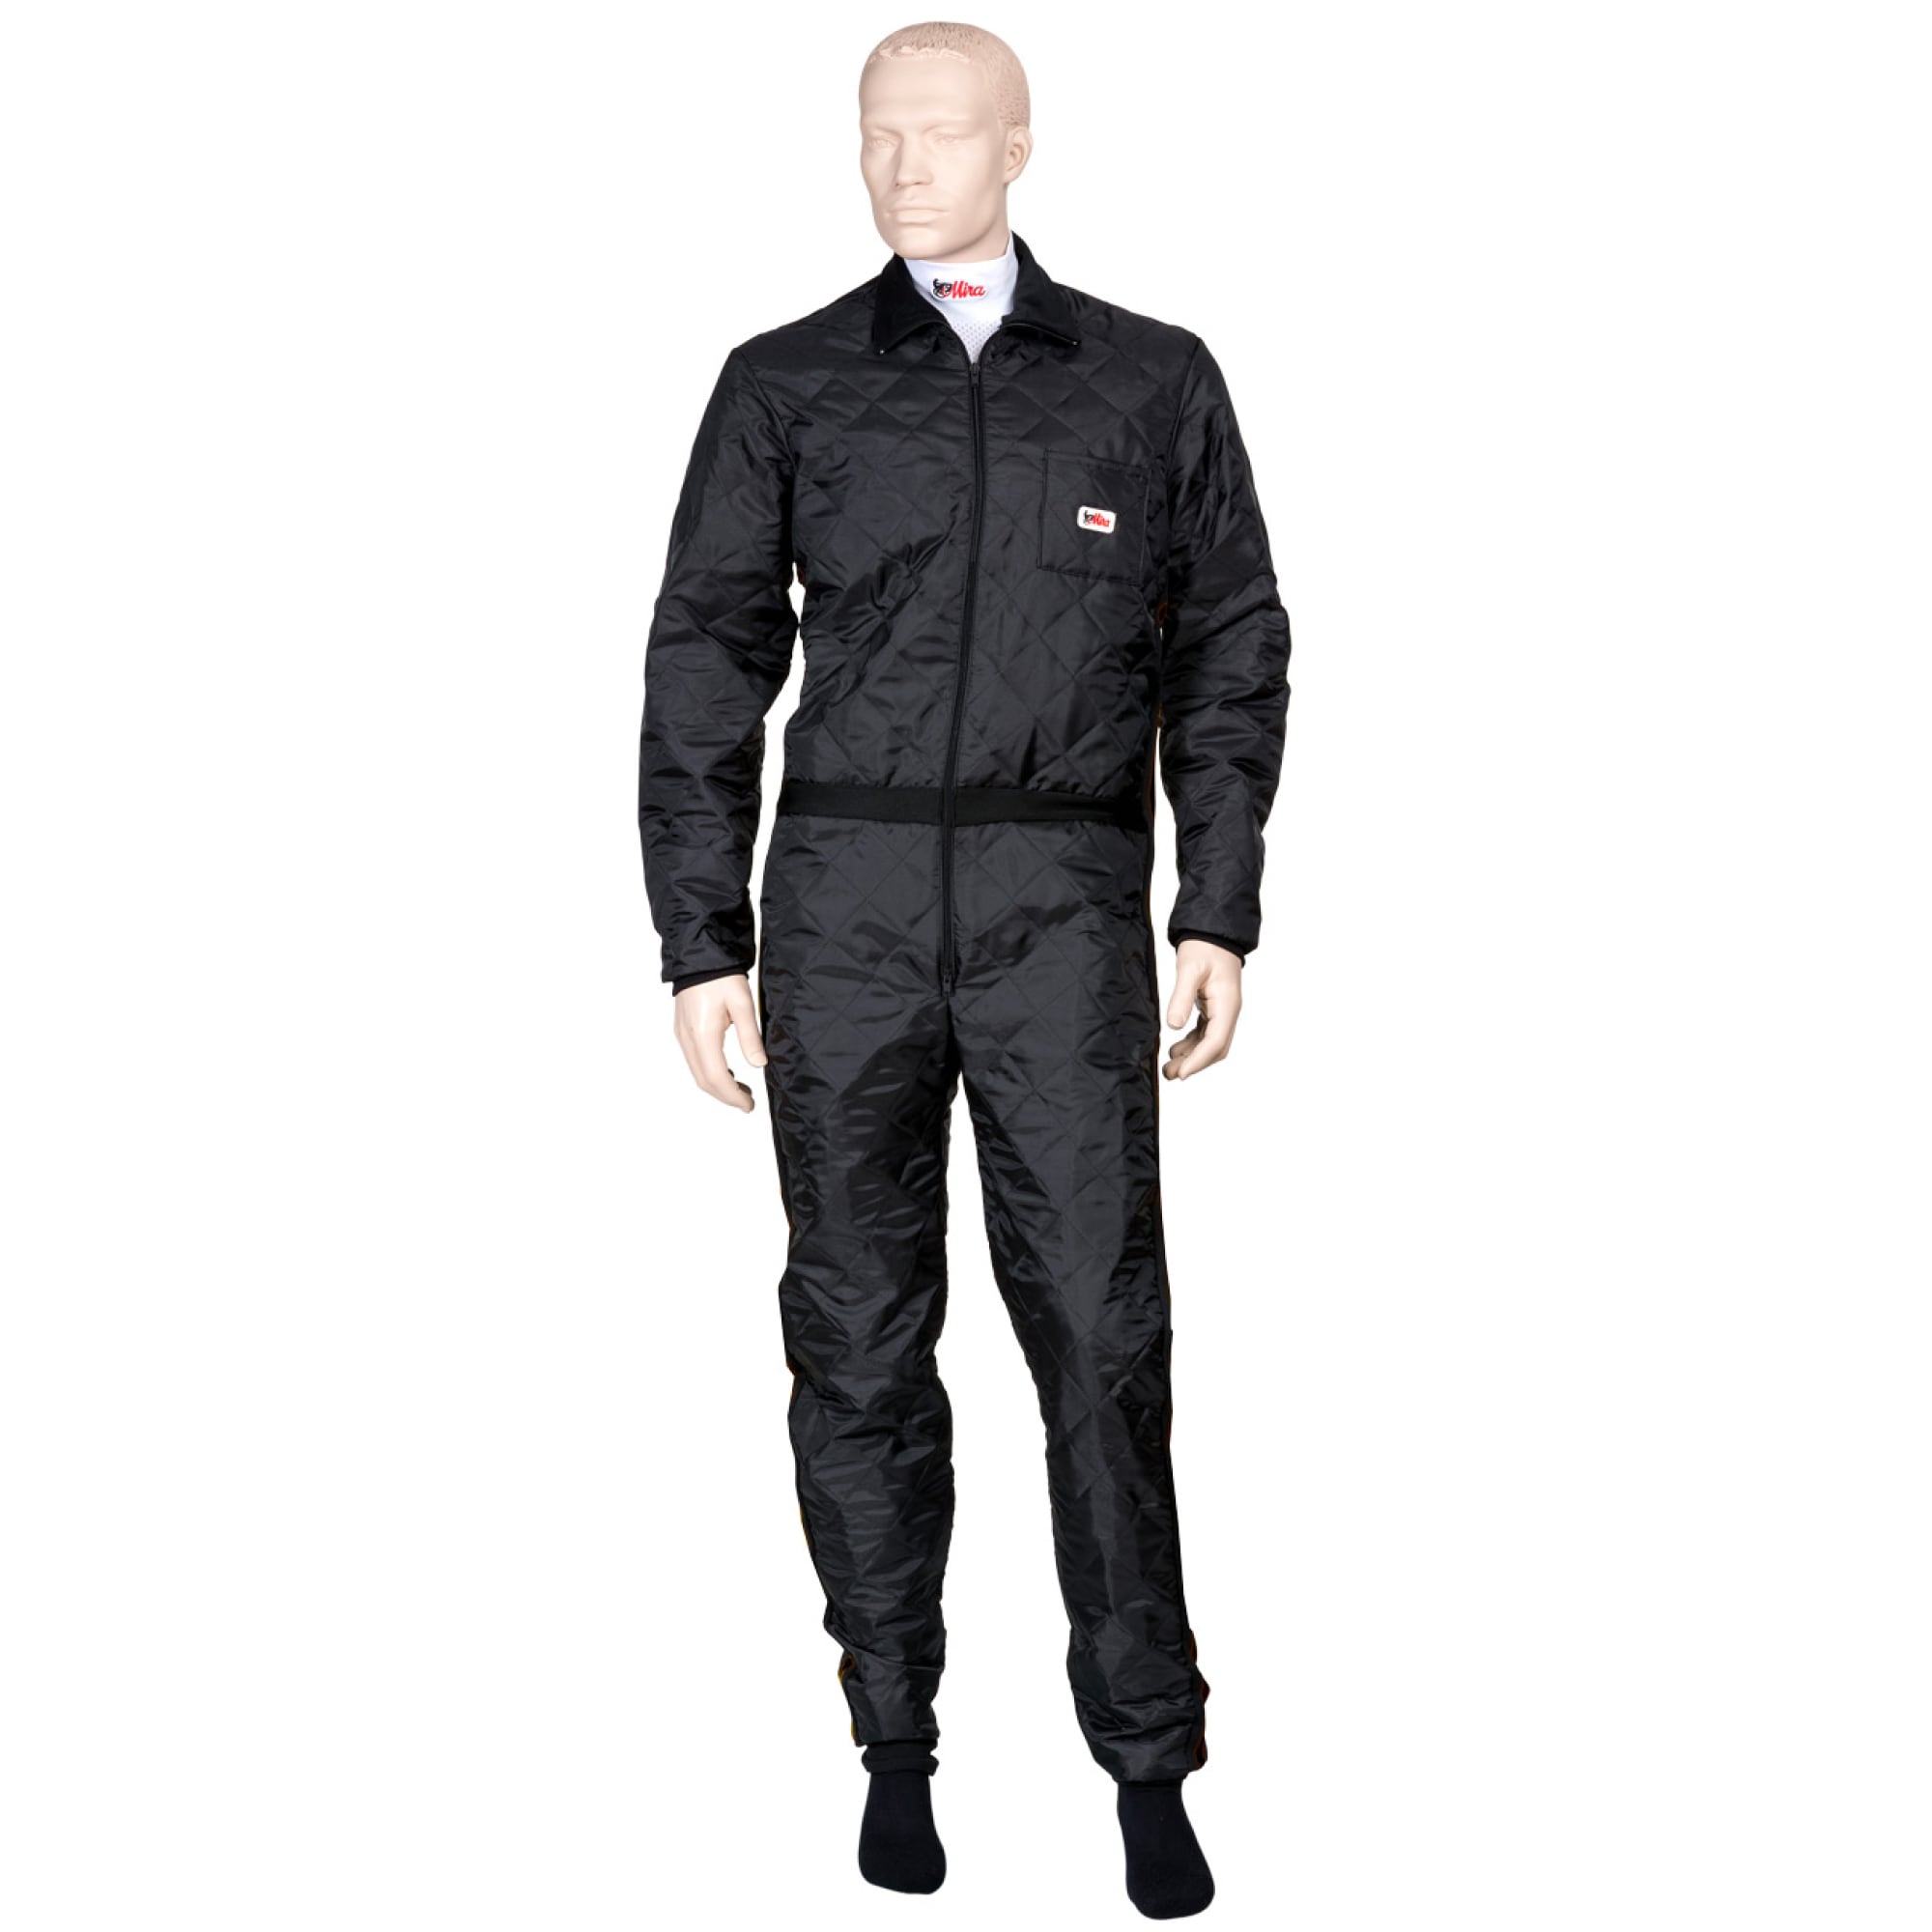 Mira Unisex Thermo Overall